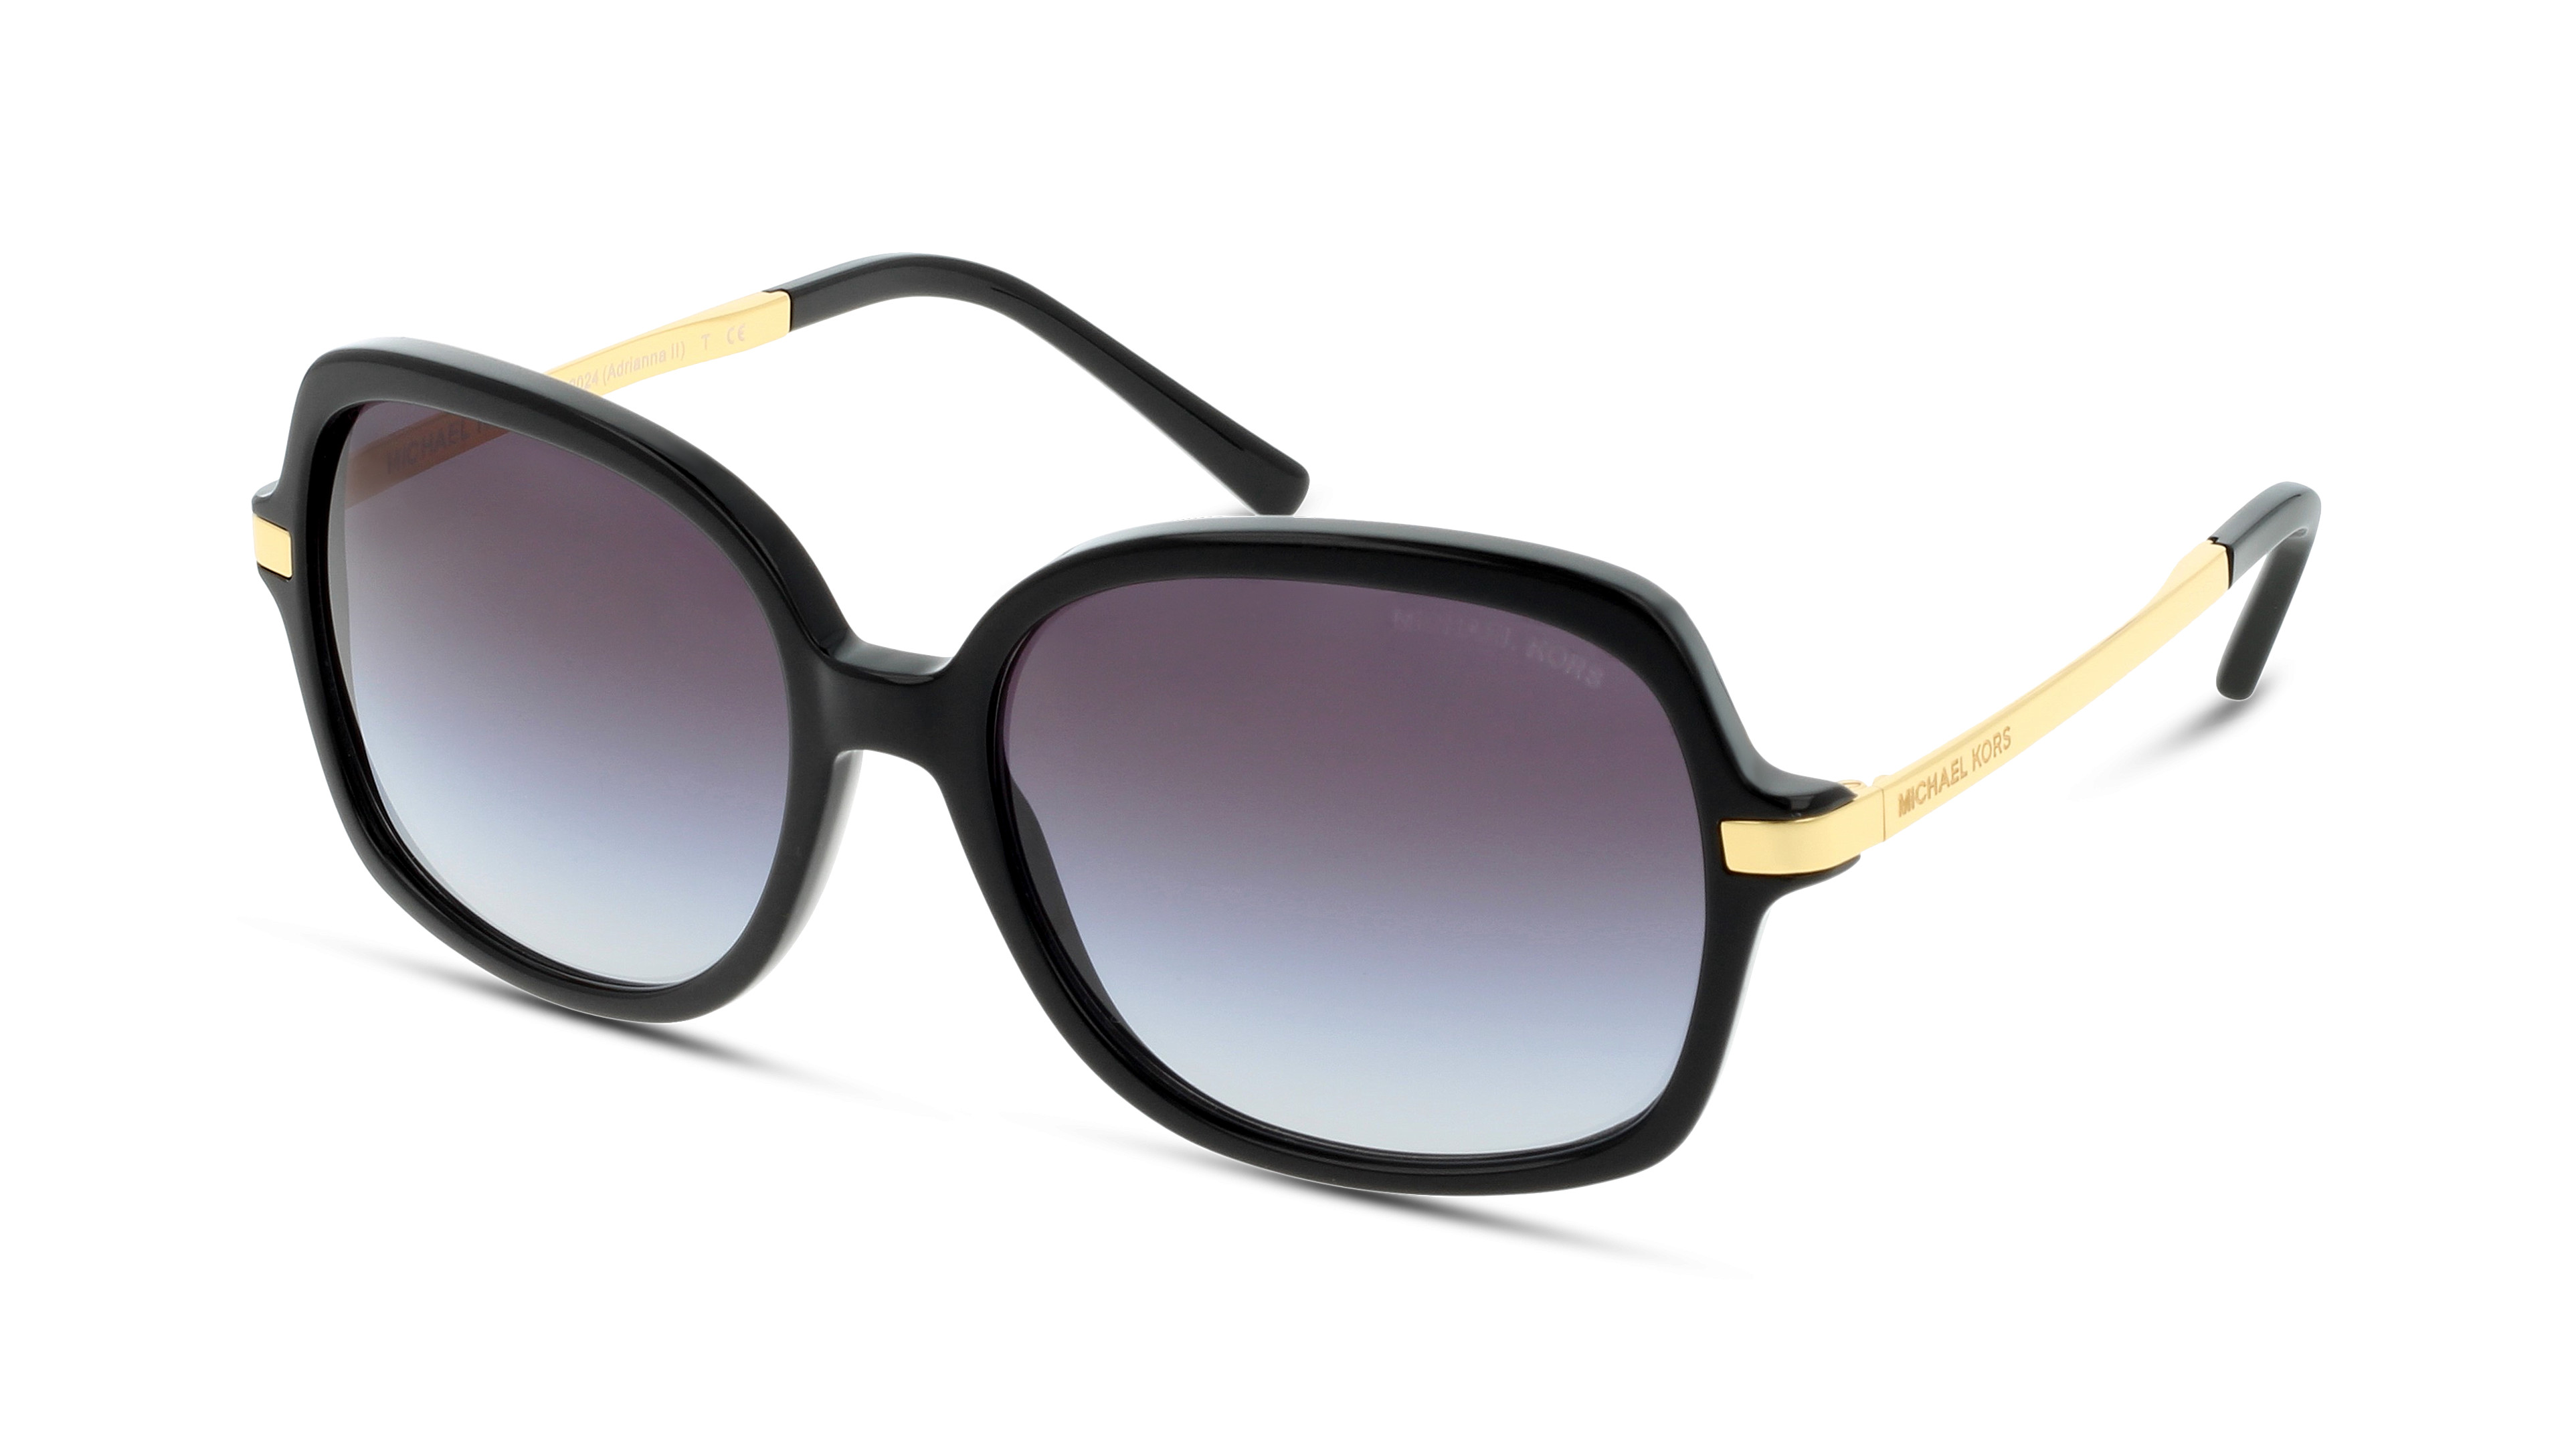 [products.image.angle_left01] Michael Kors ADRIANNA II 0MK2024 316011 Sonnenbrille